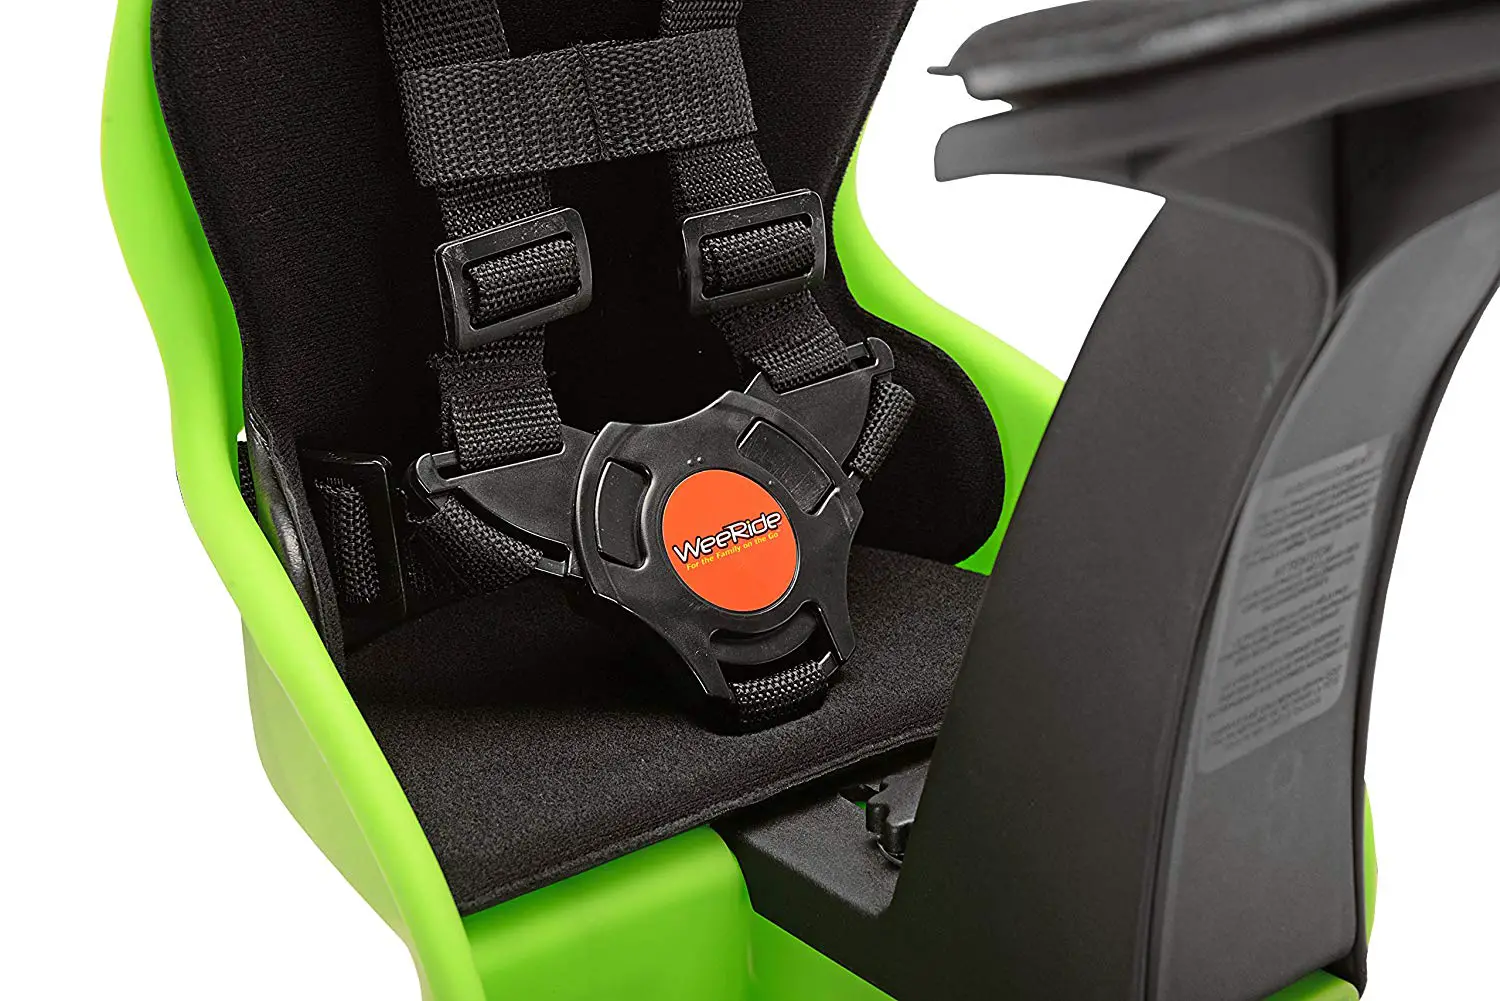 The WeeRide Kangaroo bike seat comes with a secure harness fastening.